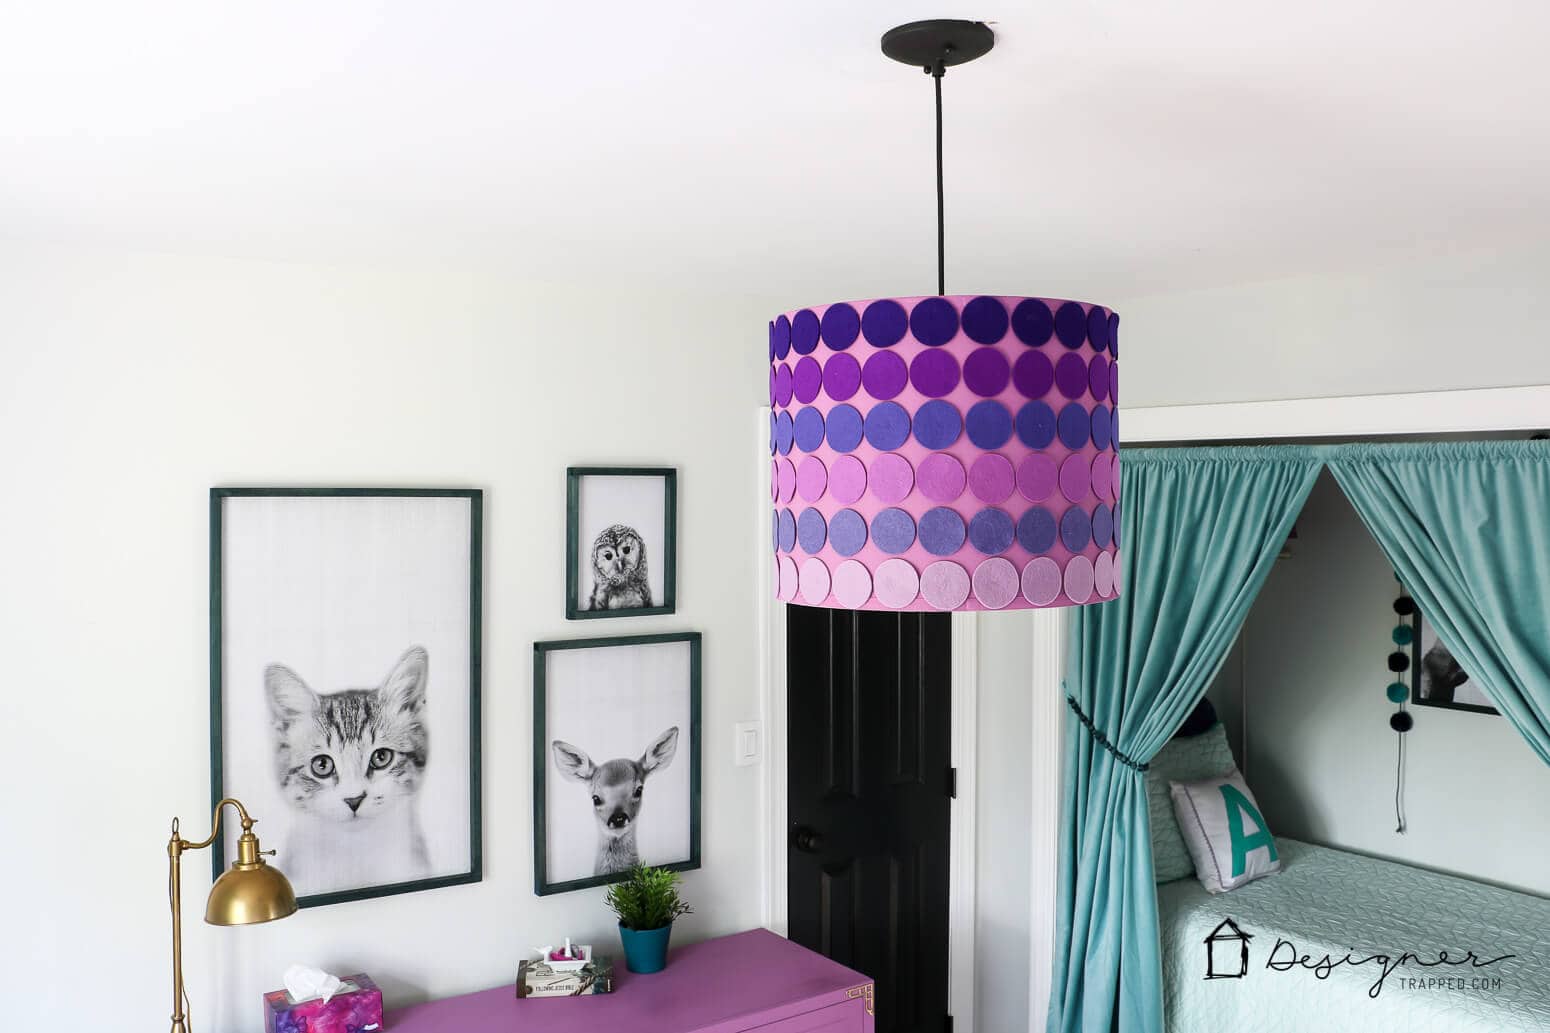 When you can't find the perfect lampshade for your decor, make one yourself! This easy DIY lampshade could be made with any shapes or colors.